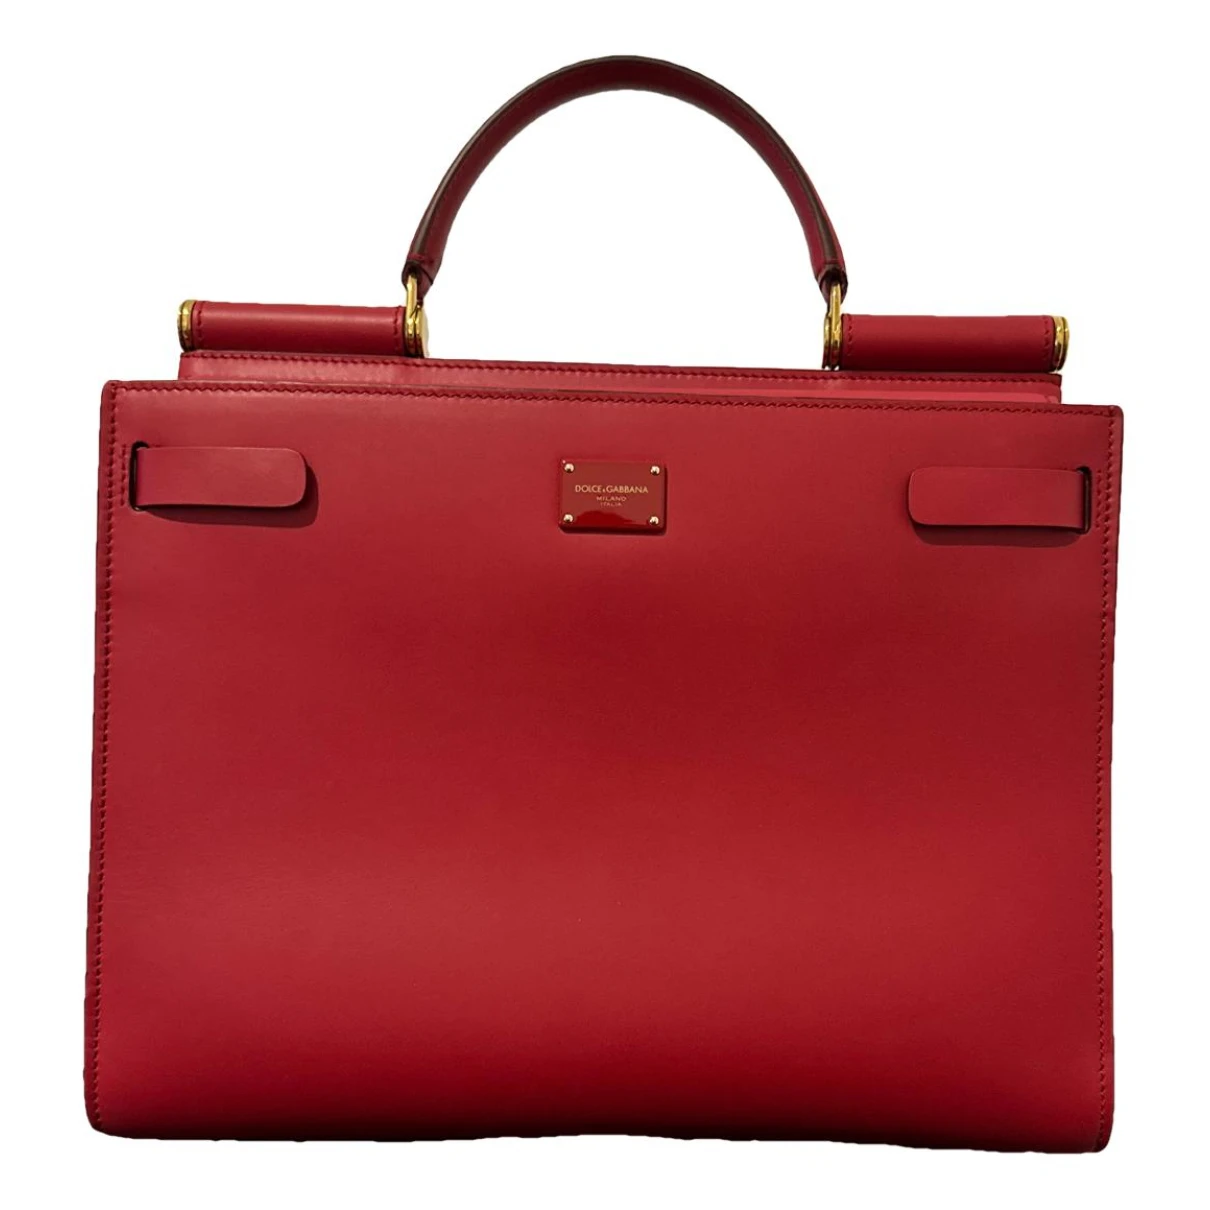 Pre-owned Dolce & Gabbana Sicily 62 Leather Handbag In Red